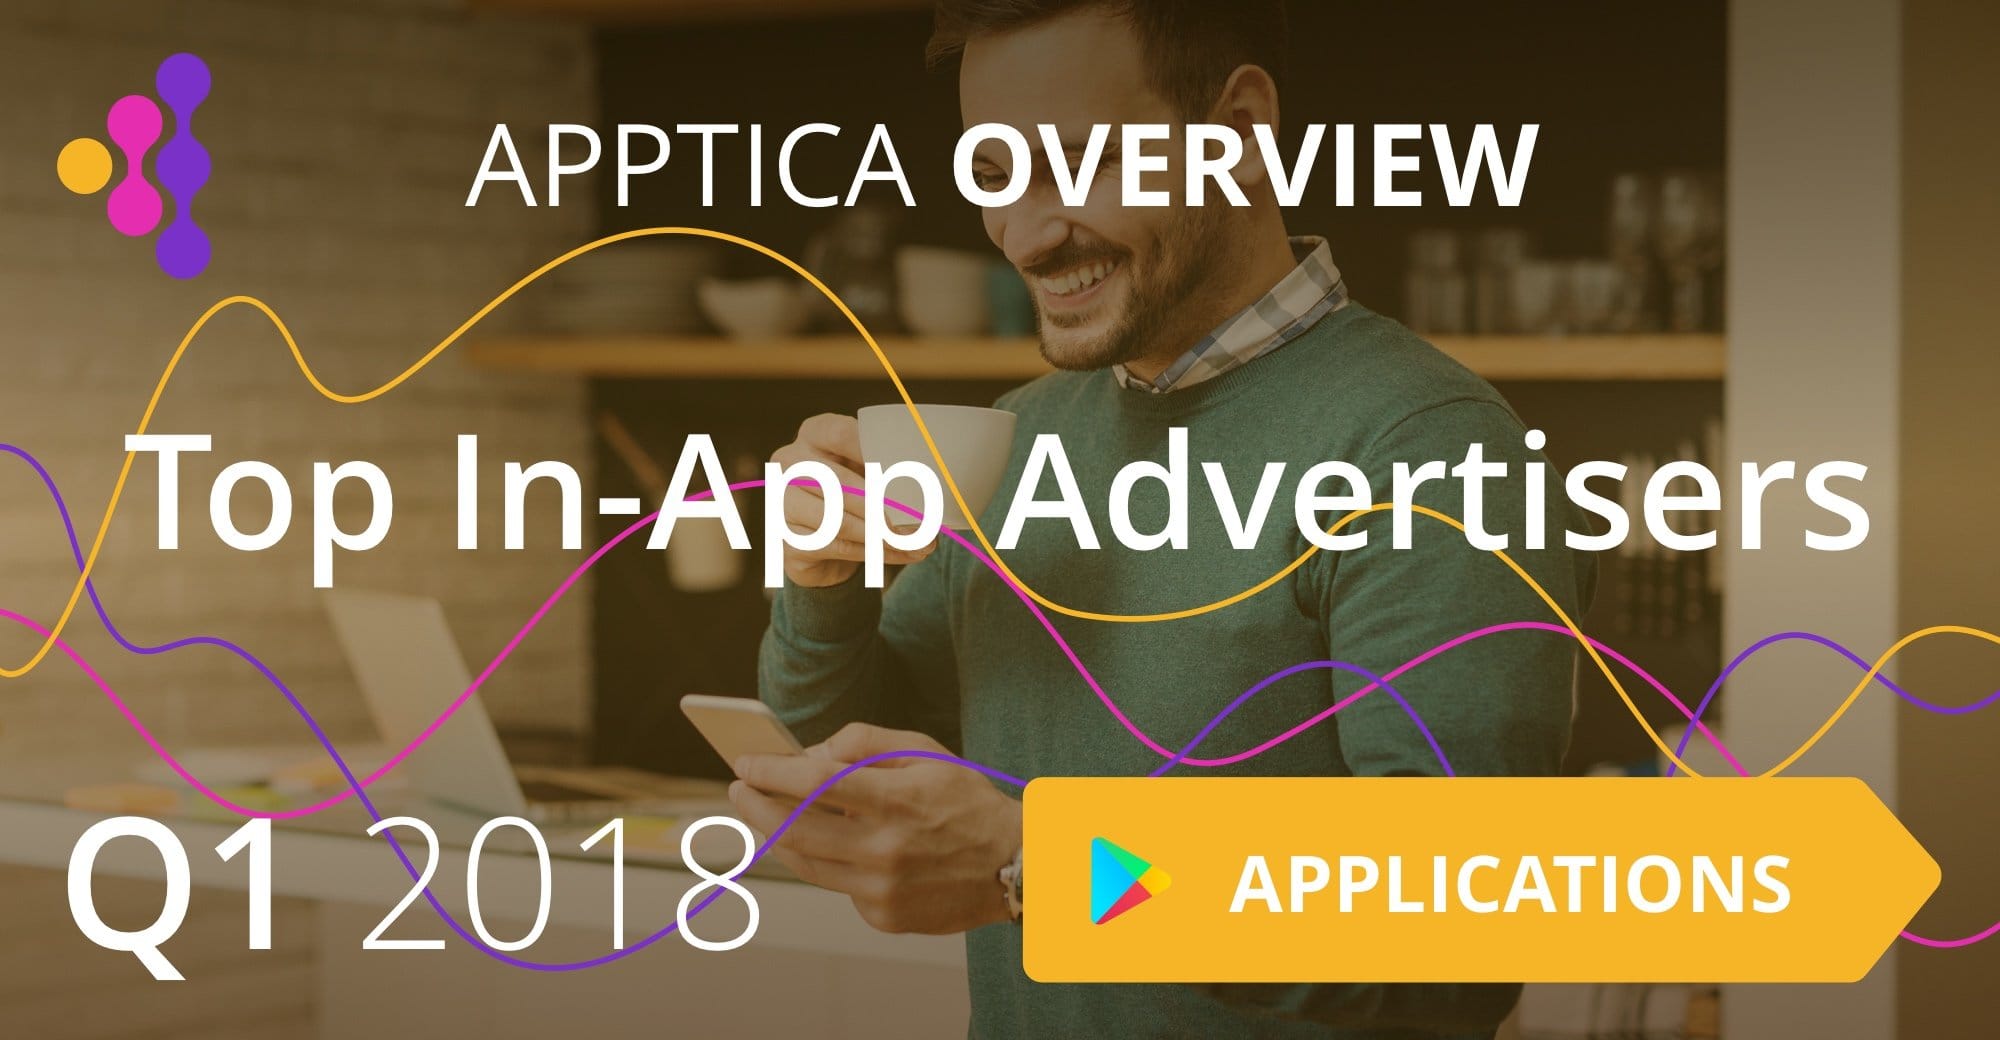 Top In-App Advertisers of Q1 2018, Android, Application Category. Apptica Overview.